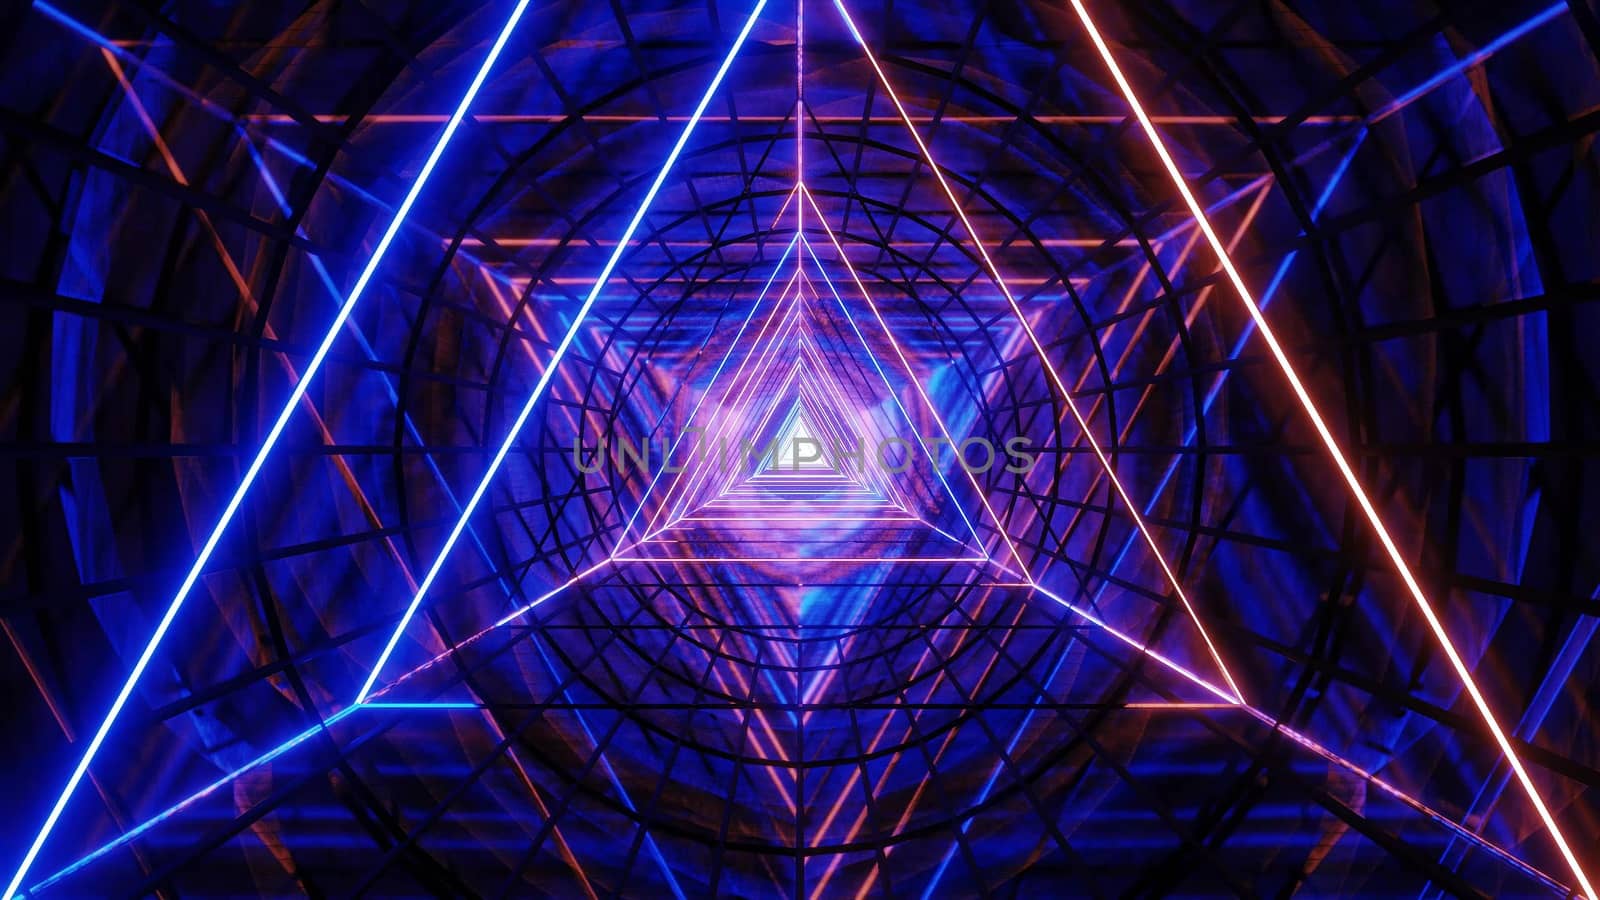 abstract glowig wireframe triangle design with dark abstract background 3d illustration wallpaper by tunnelmotions